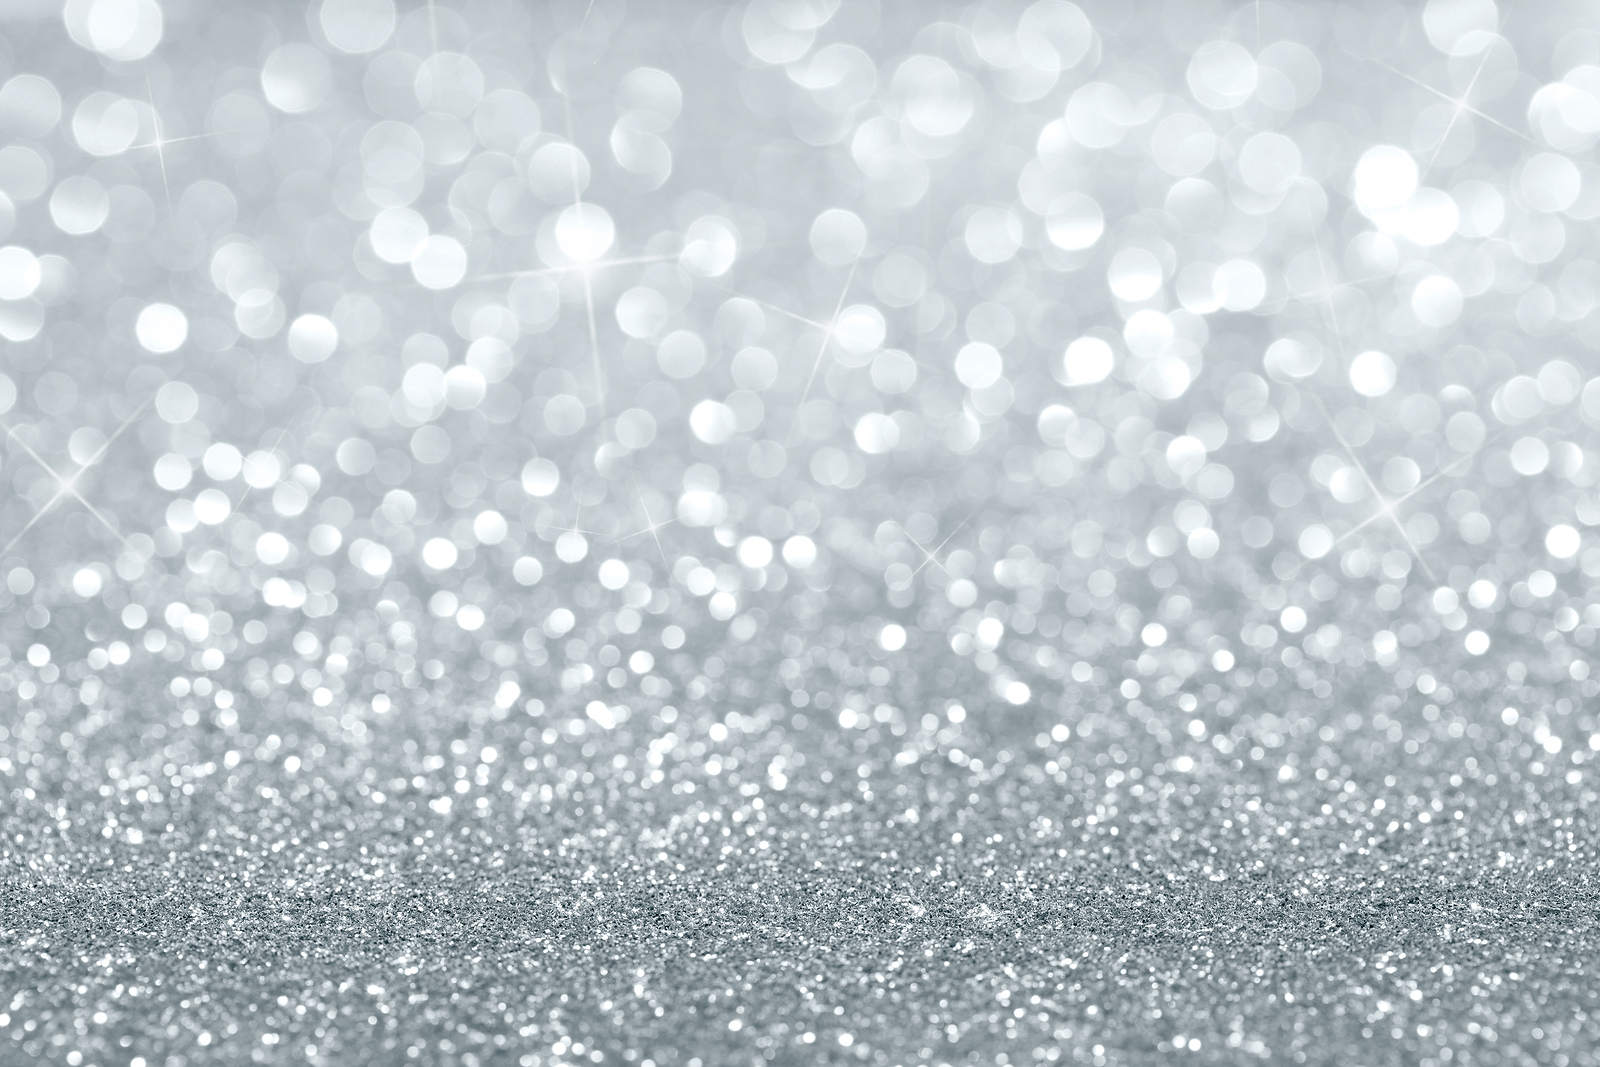 Home Abstract Silver Glitter Desktop Background